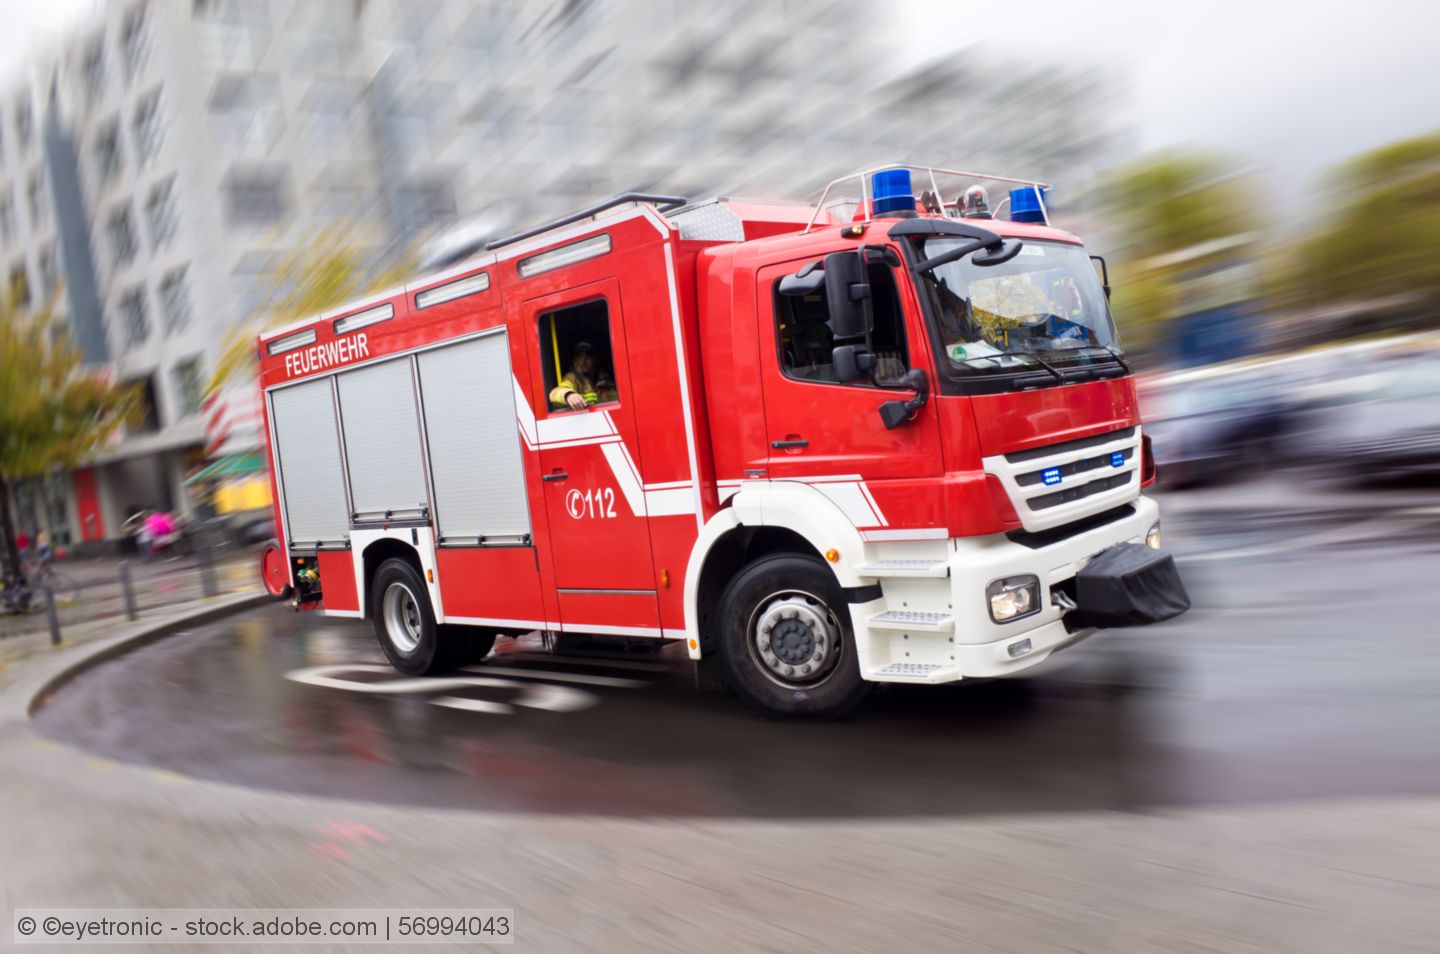 Fire at Hamburger Rieger in Trostberg